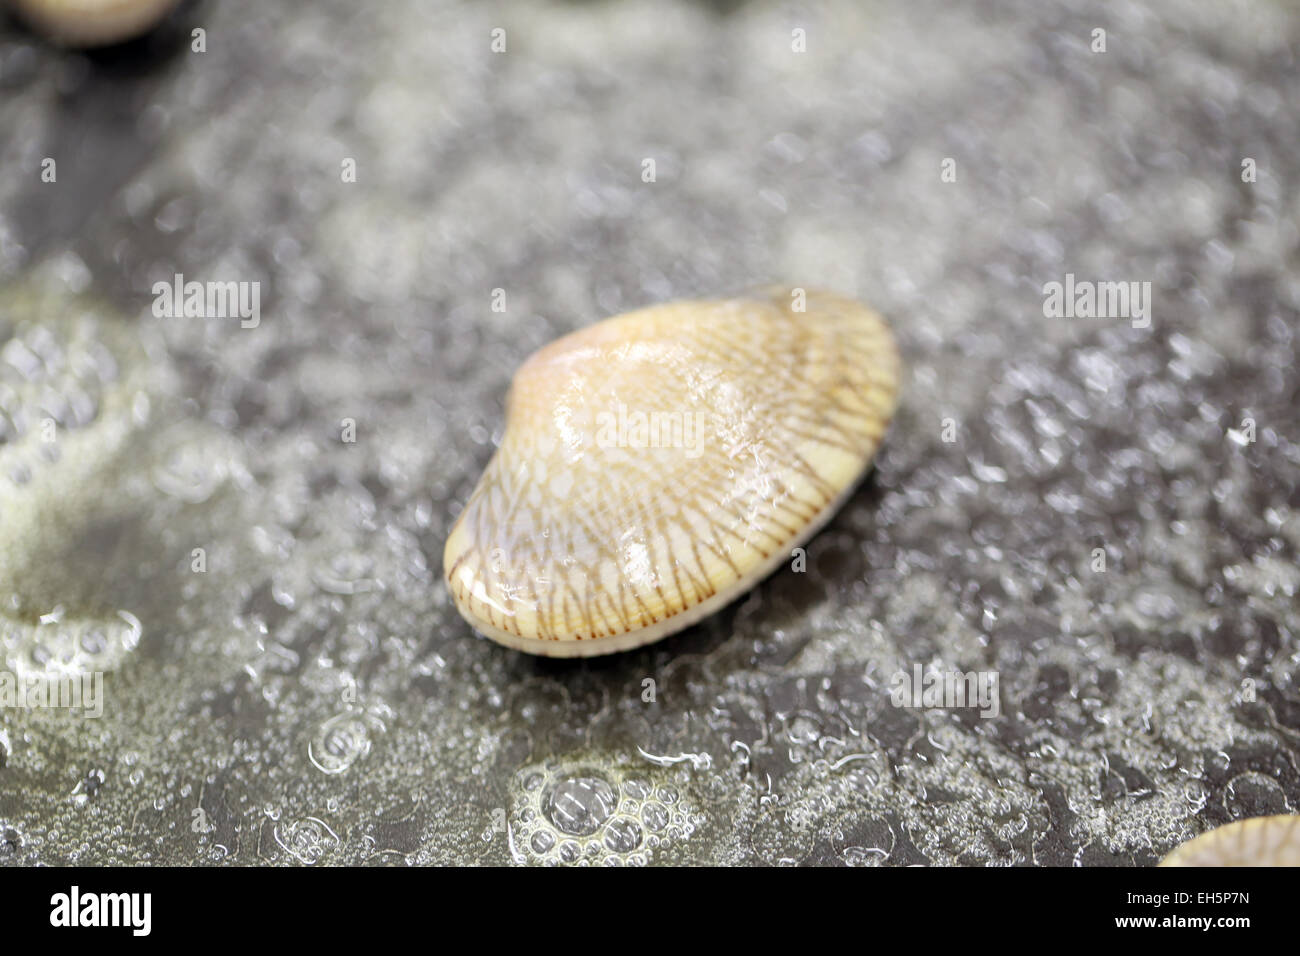 Fried baby clams with butter for foods background. Stock Photo